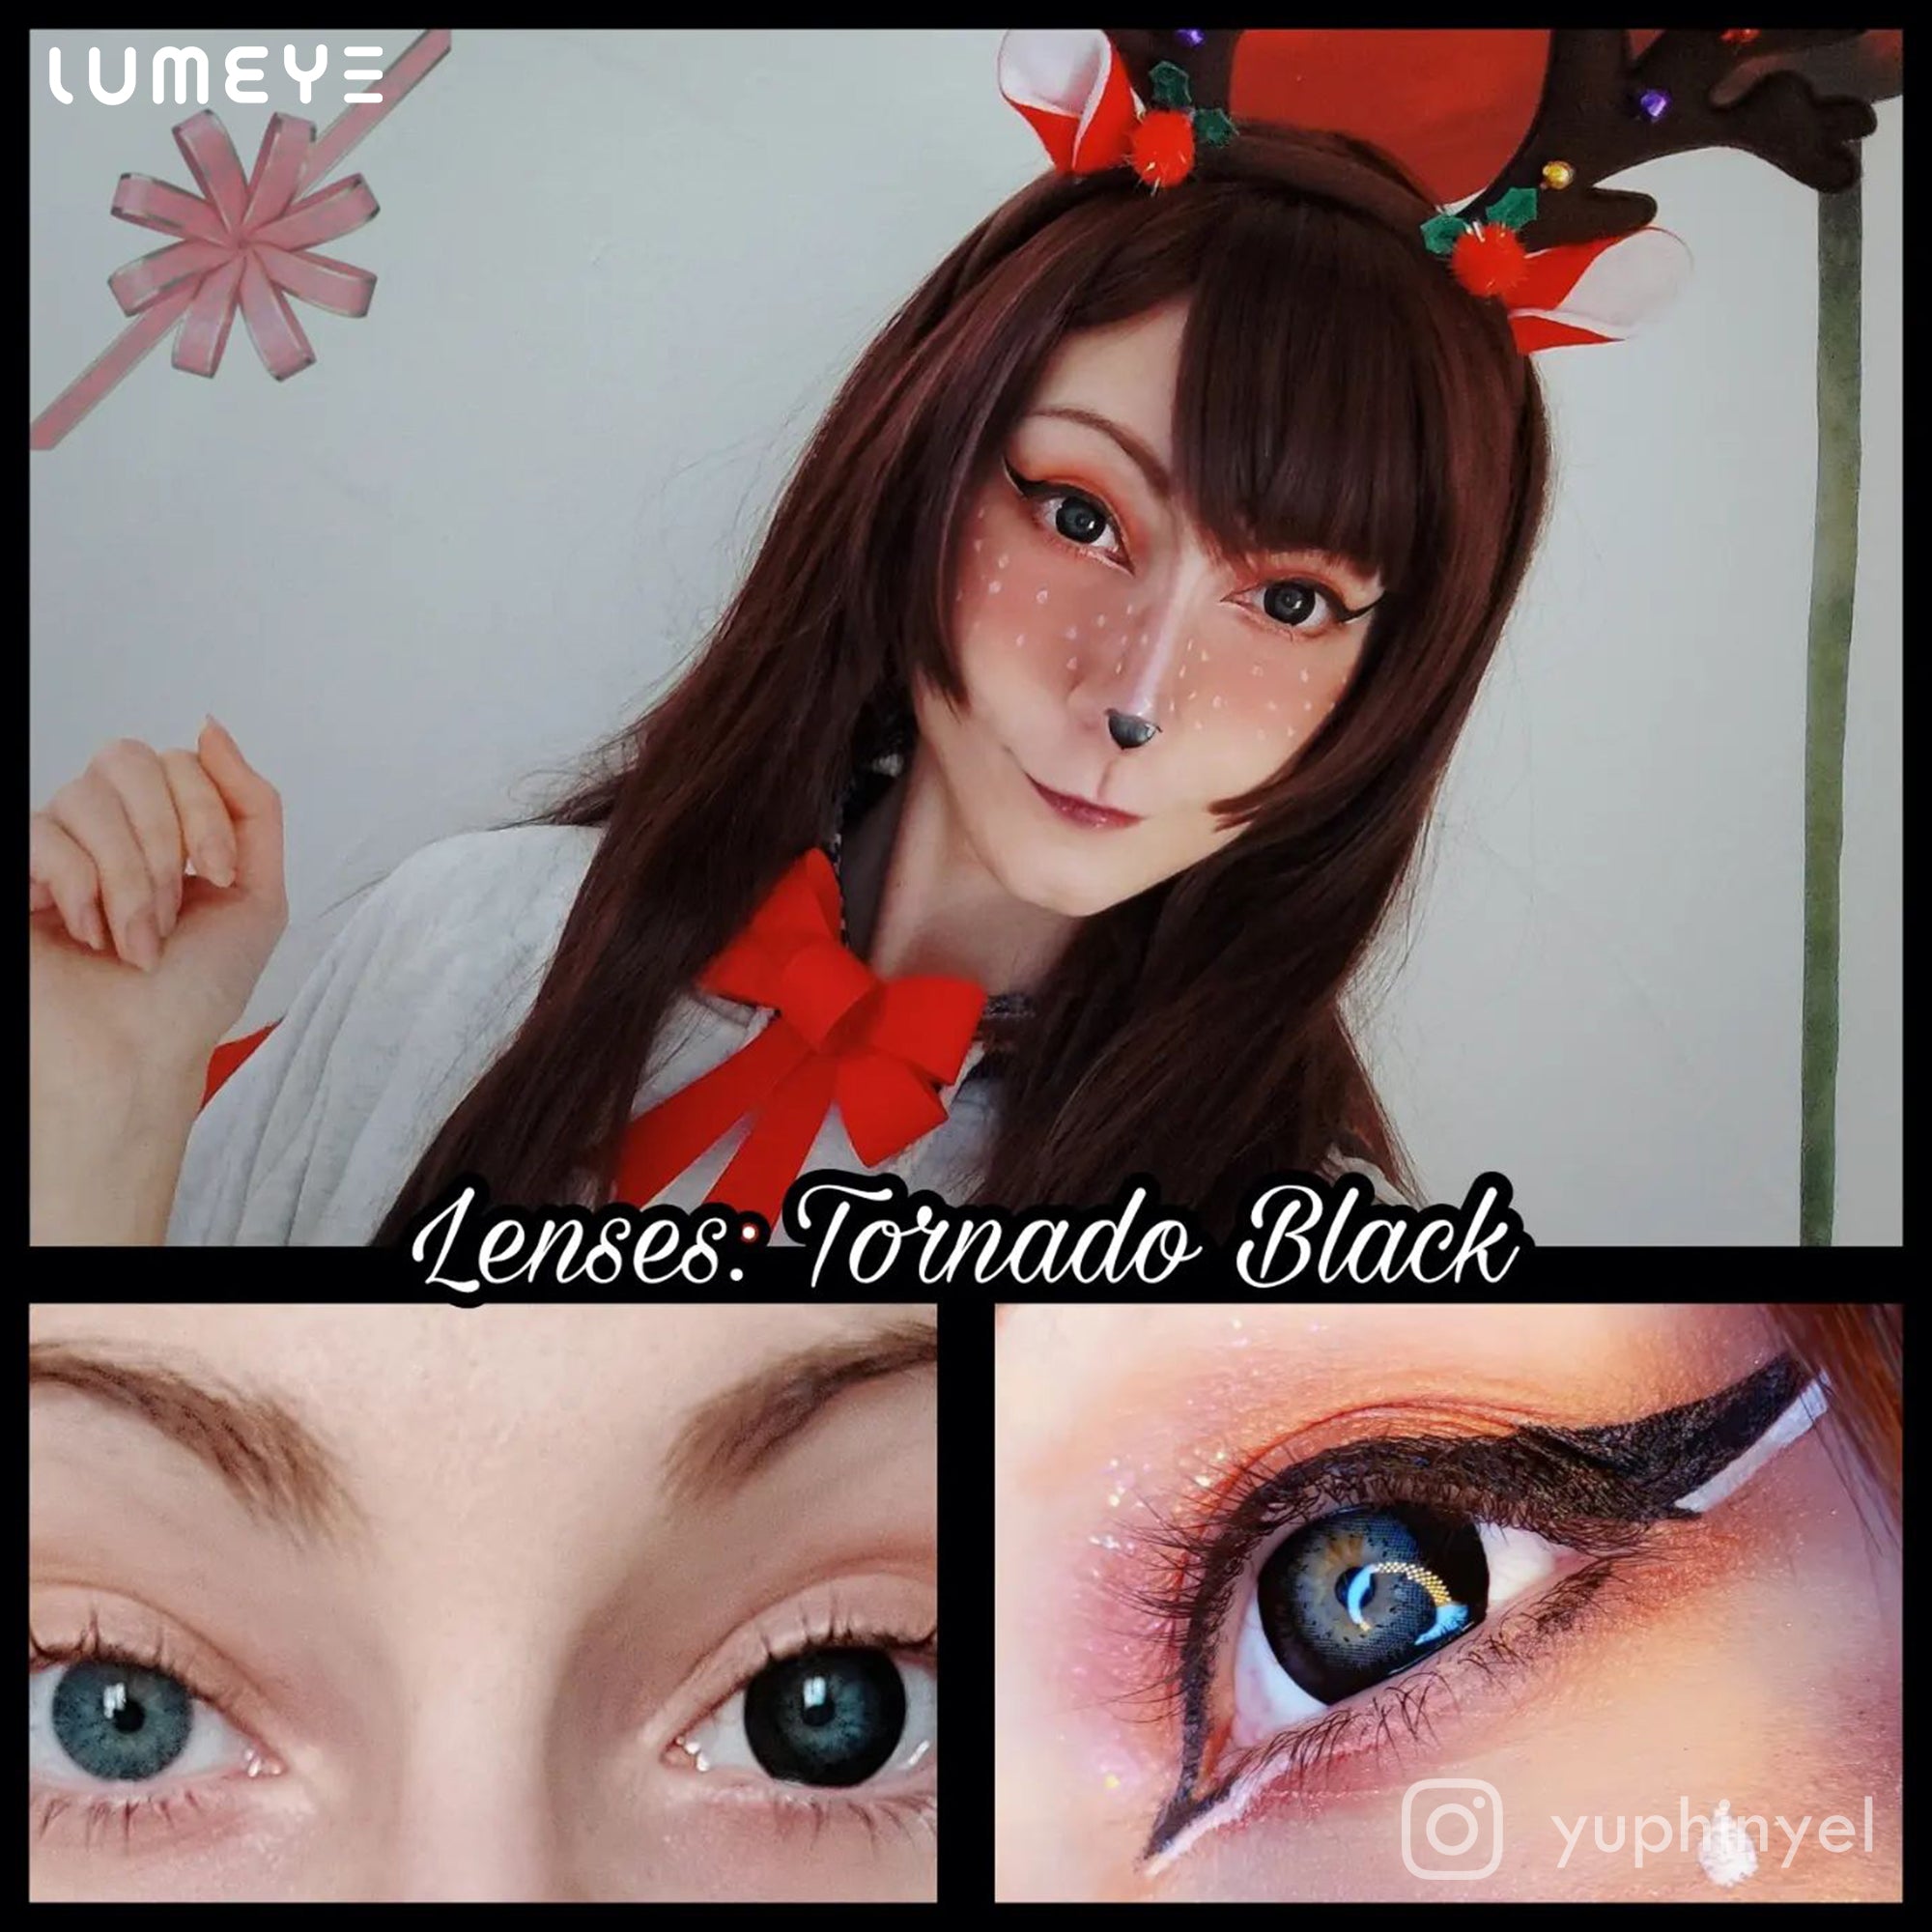 Best COLORED CONTACTS - LUMEYE Tornado Black Colored Contact Lenses - LUMEYE